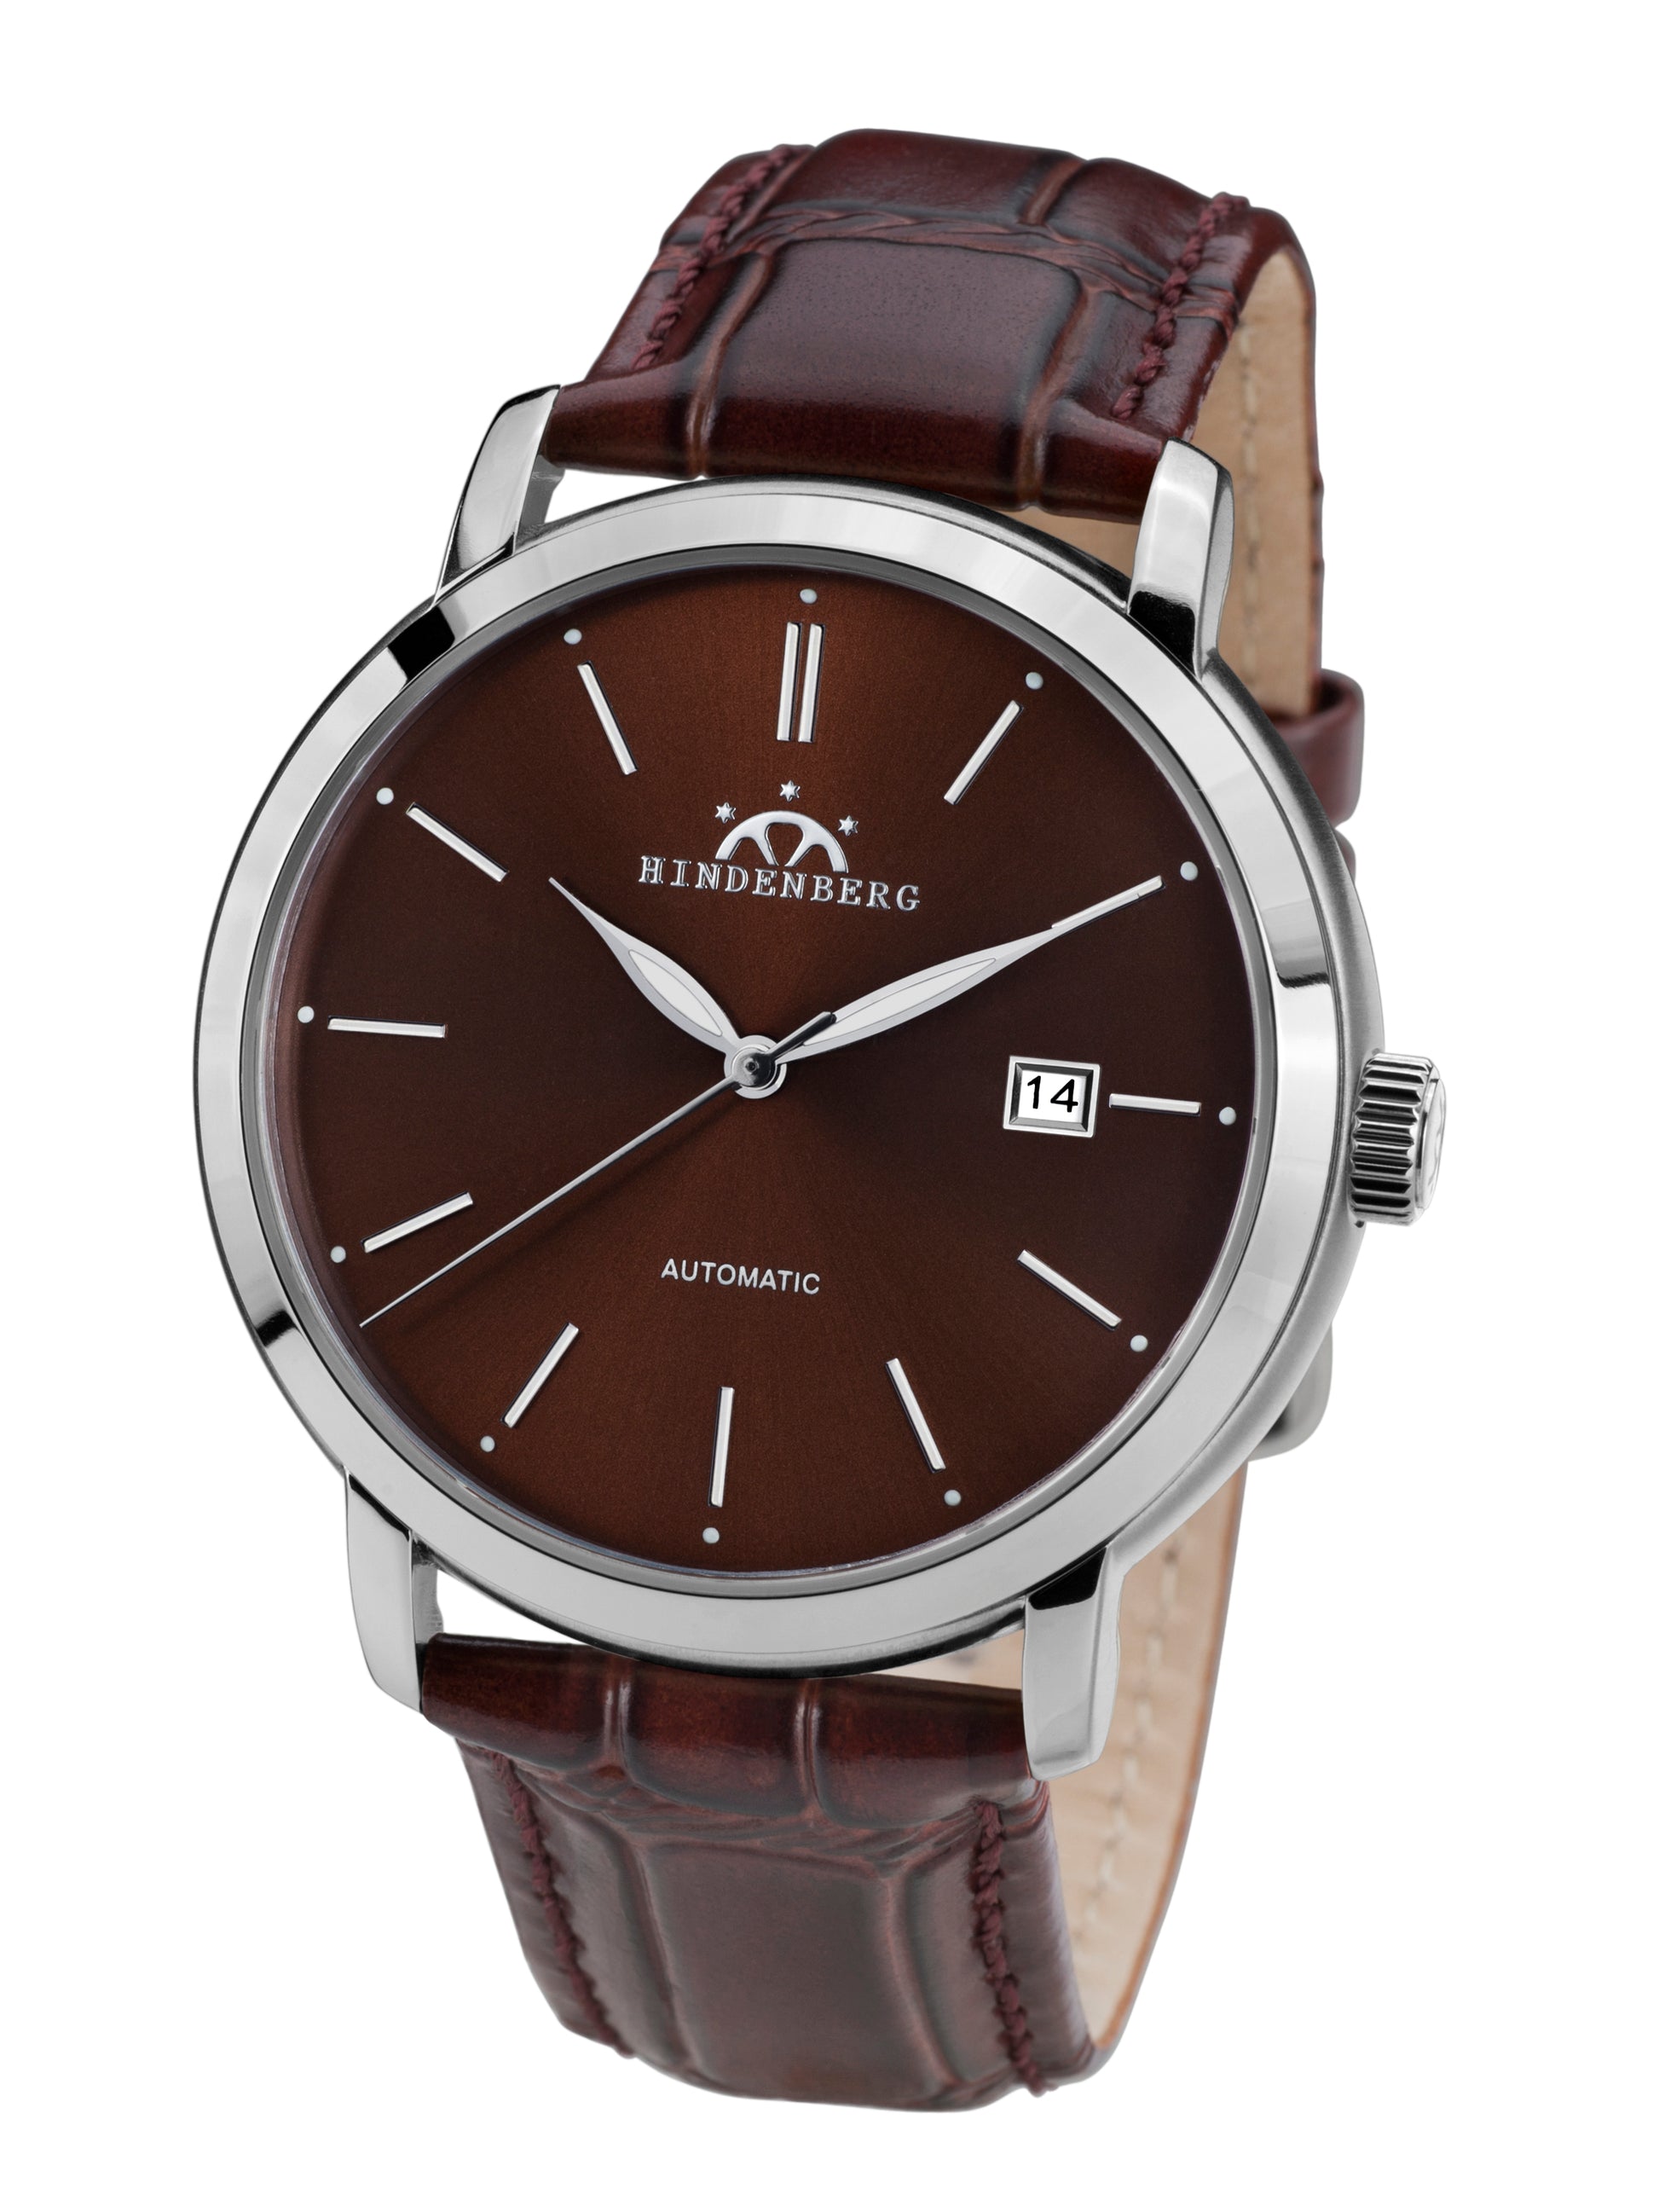 Automatic watches — Ascender — Hindenberg — steel brown